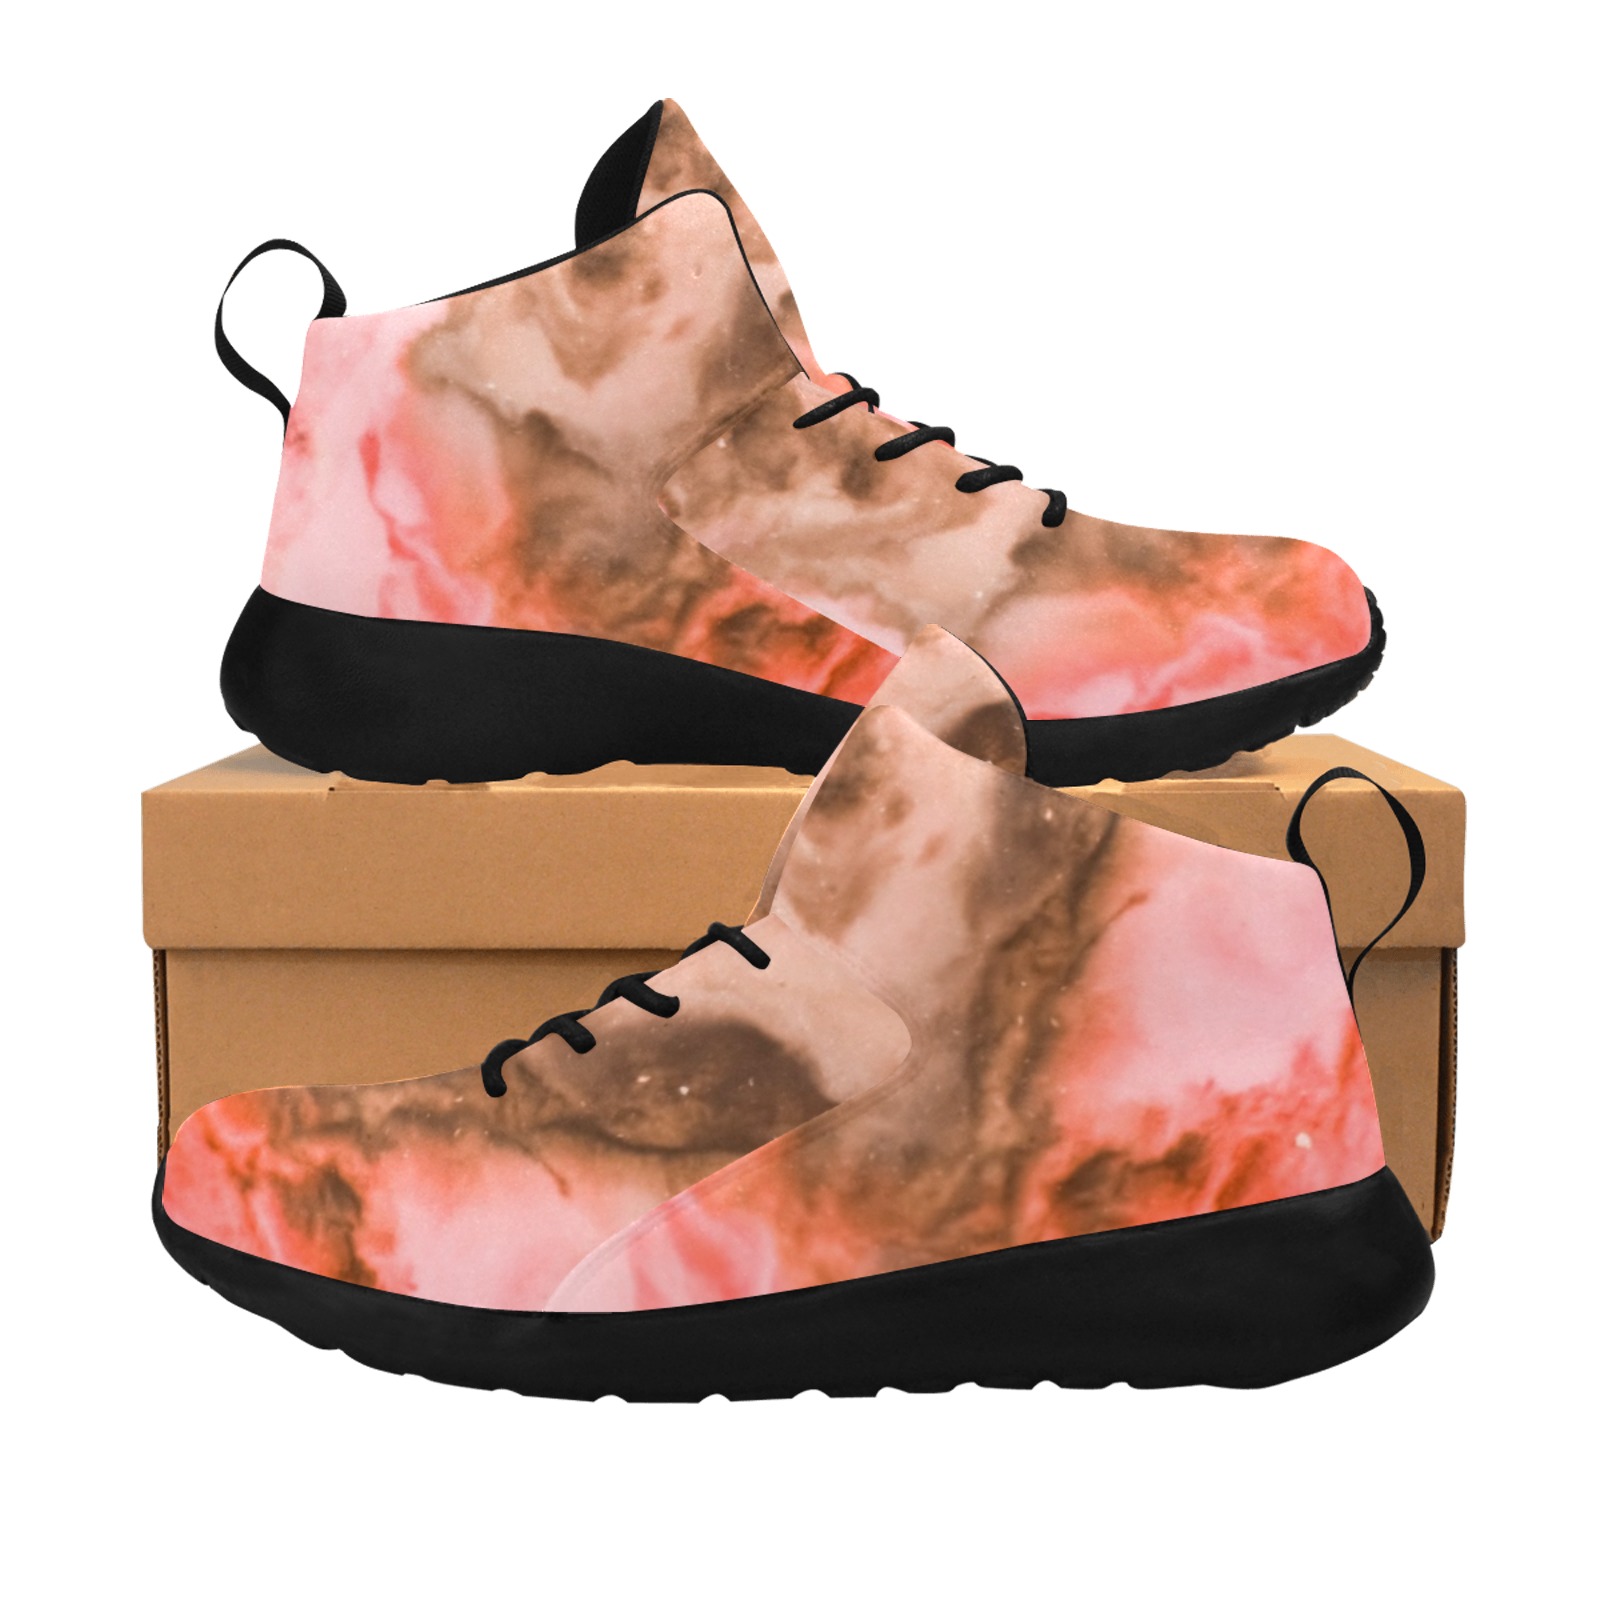 Pink marbled space 01 Women's Chukka Training Shoes (Model 57502)